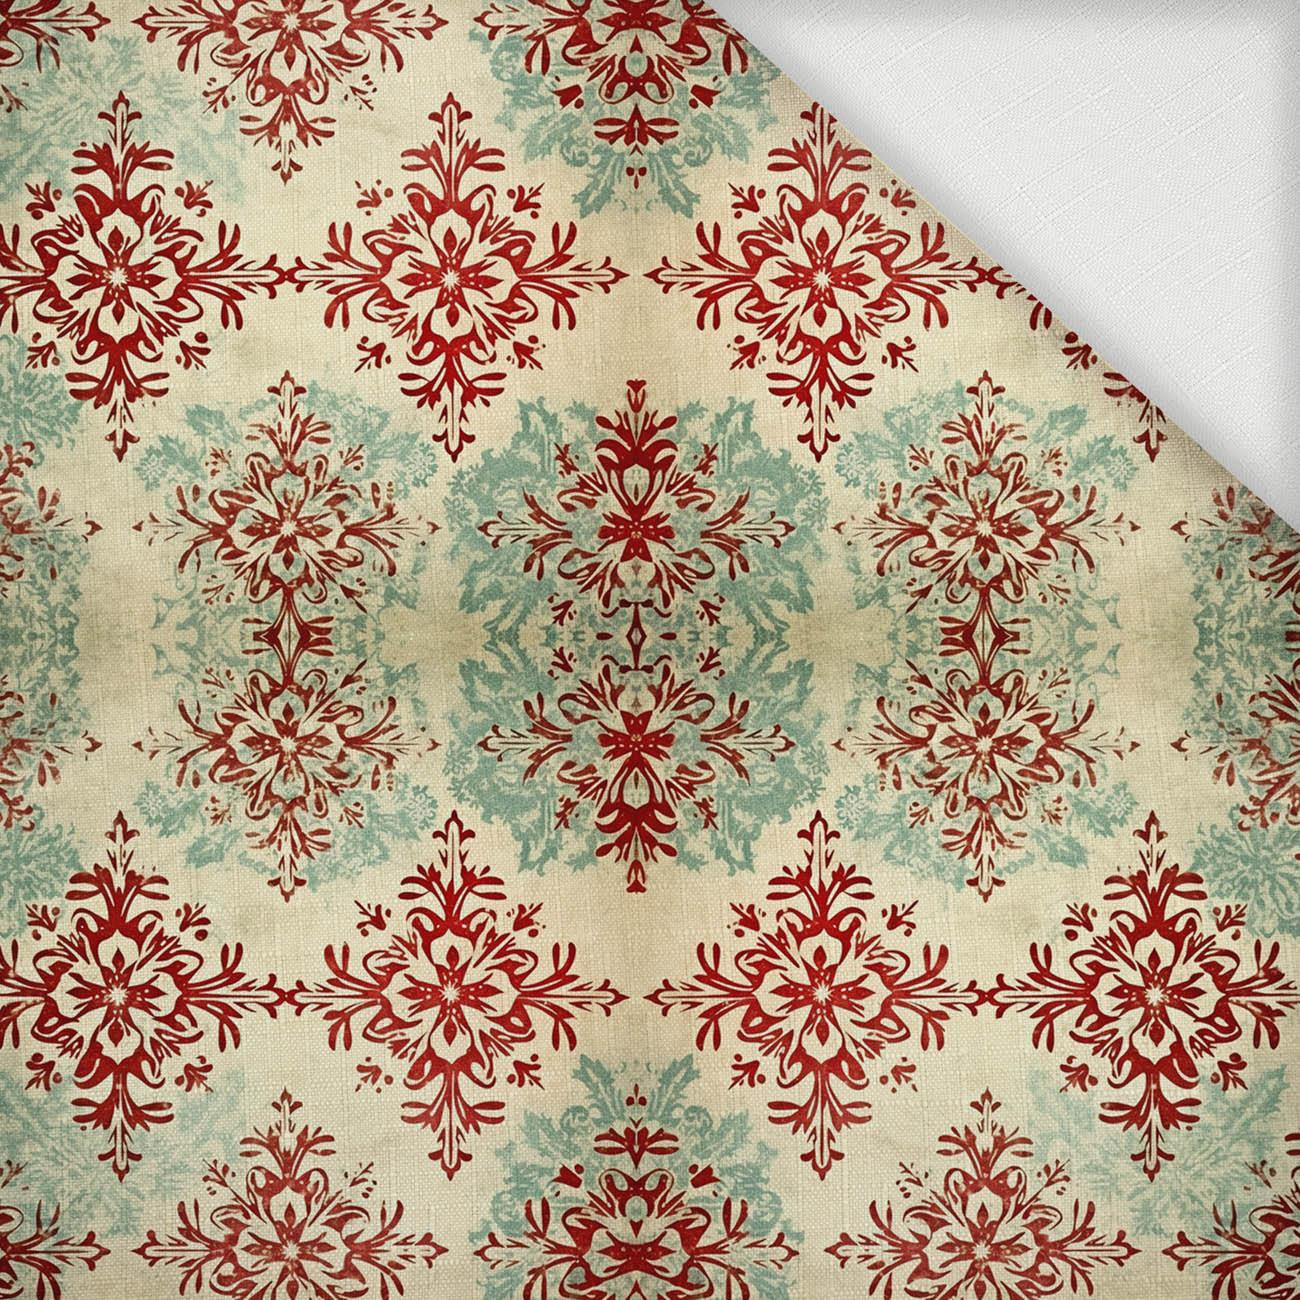 CHRISTMAS DAMASCO pat. 3 - Woven Fabric for tablecloths